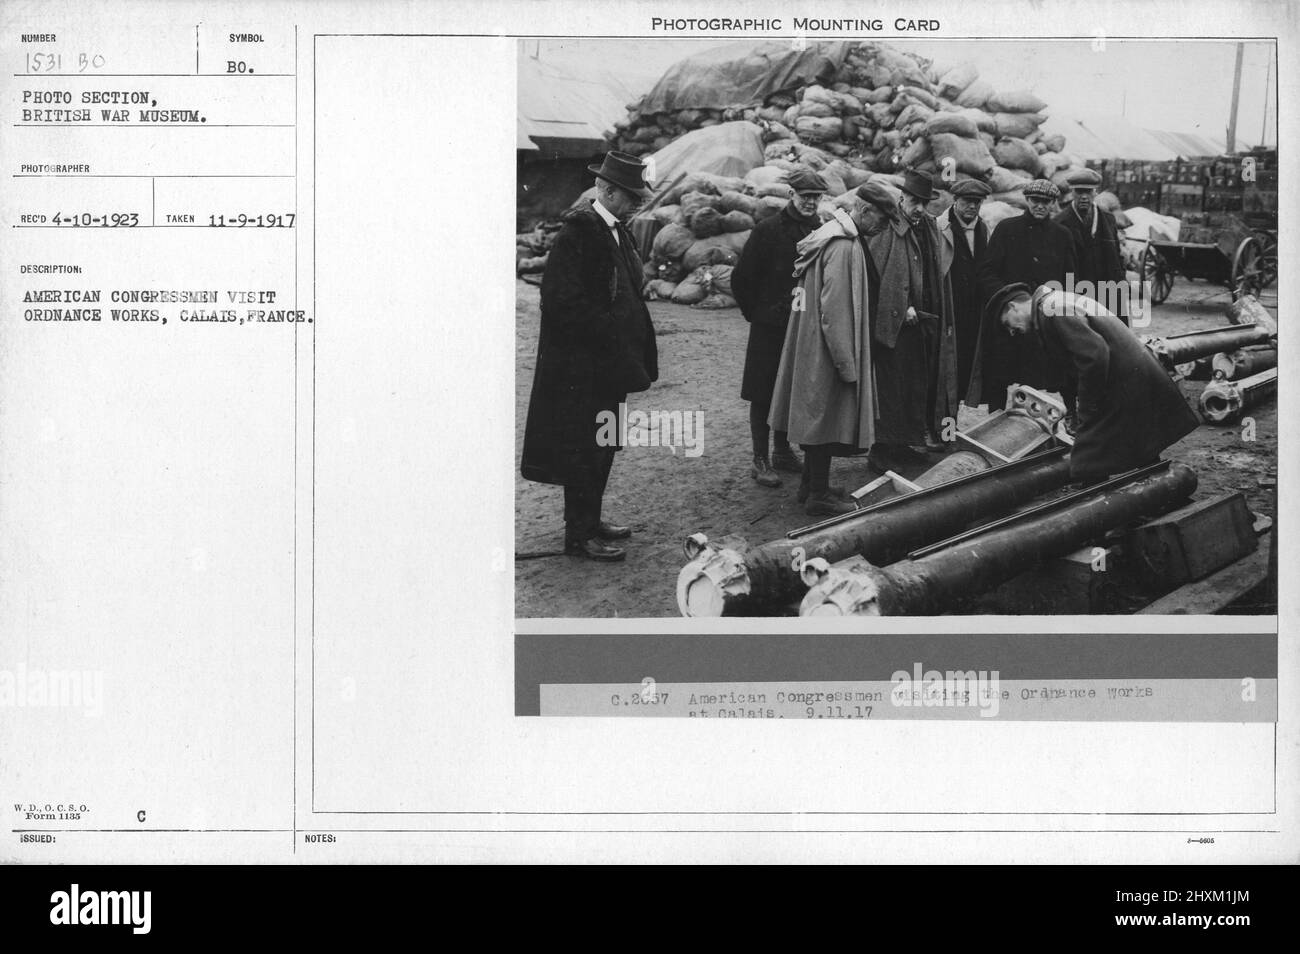 American congressmen visit Ordnance Works. Calais, France. 11-9-1917. Collection of World War I Photographs, 1914-1918 that depict the military activities of British and other nation's armed forces and personnel during World War I. Stock Photo